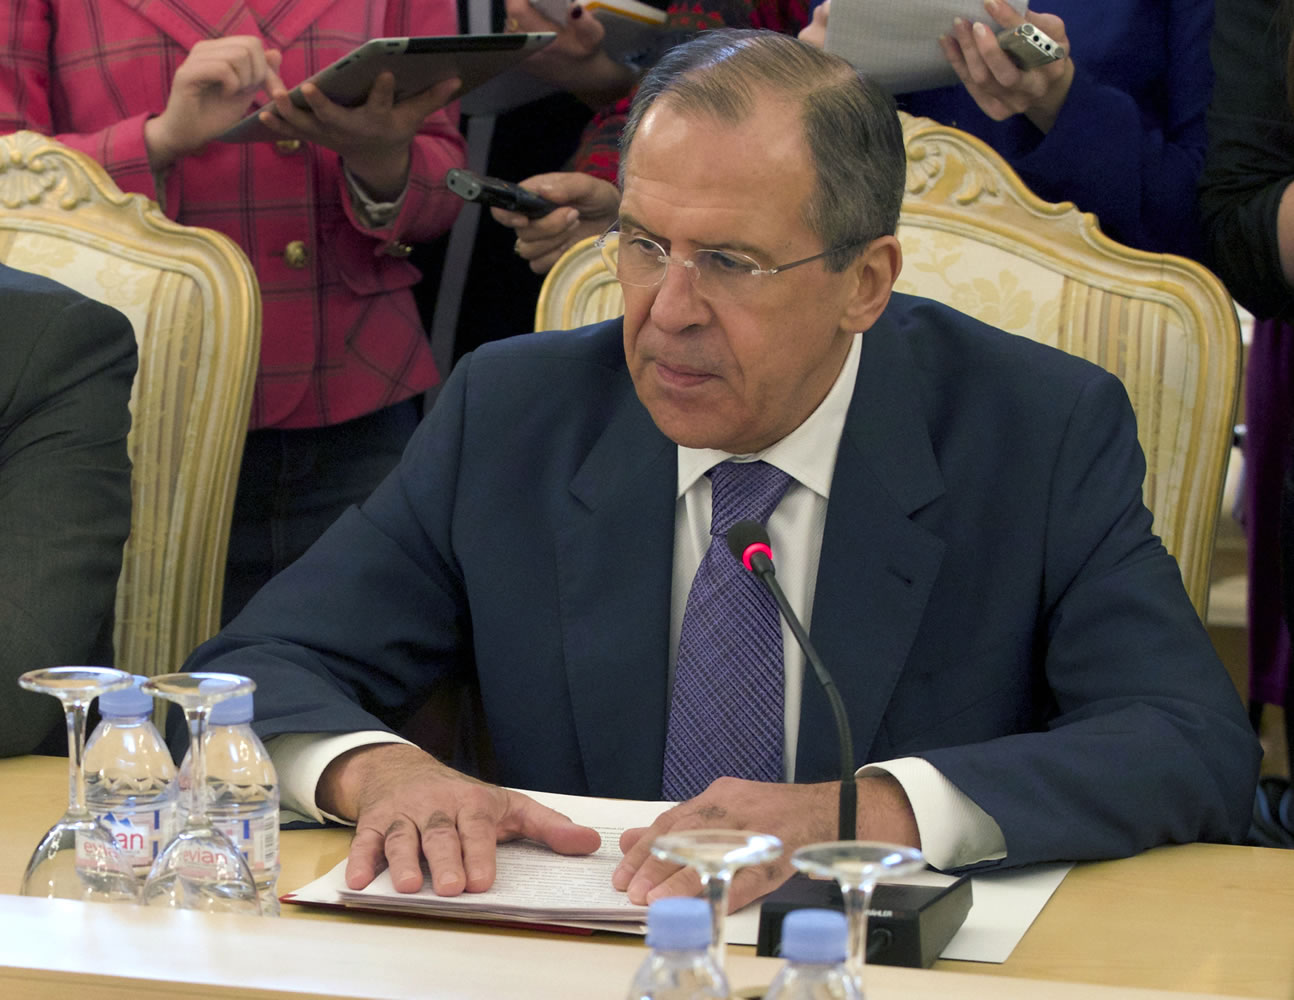 FILE- Russian Foreign Minister Sergey Lavrov, lays his hands on the table during talks with Thailand's Foreign Minister, not pictured, in Moscow, Russia, in this file photo dated  Thursday, March 28, 2013.  Lavrov on Friday April 5, 2013, is demanding an explanation for the North Korean warning that it canit guarantee the safety of embassies in its capital of Pyongyang in the event of a conflict, asking whether the warning is an order to evacuate their embassy or merely a suggestion that they should consider doing so. North Korea's government did not comment on the request for clarification.